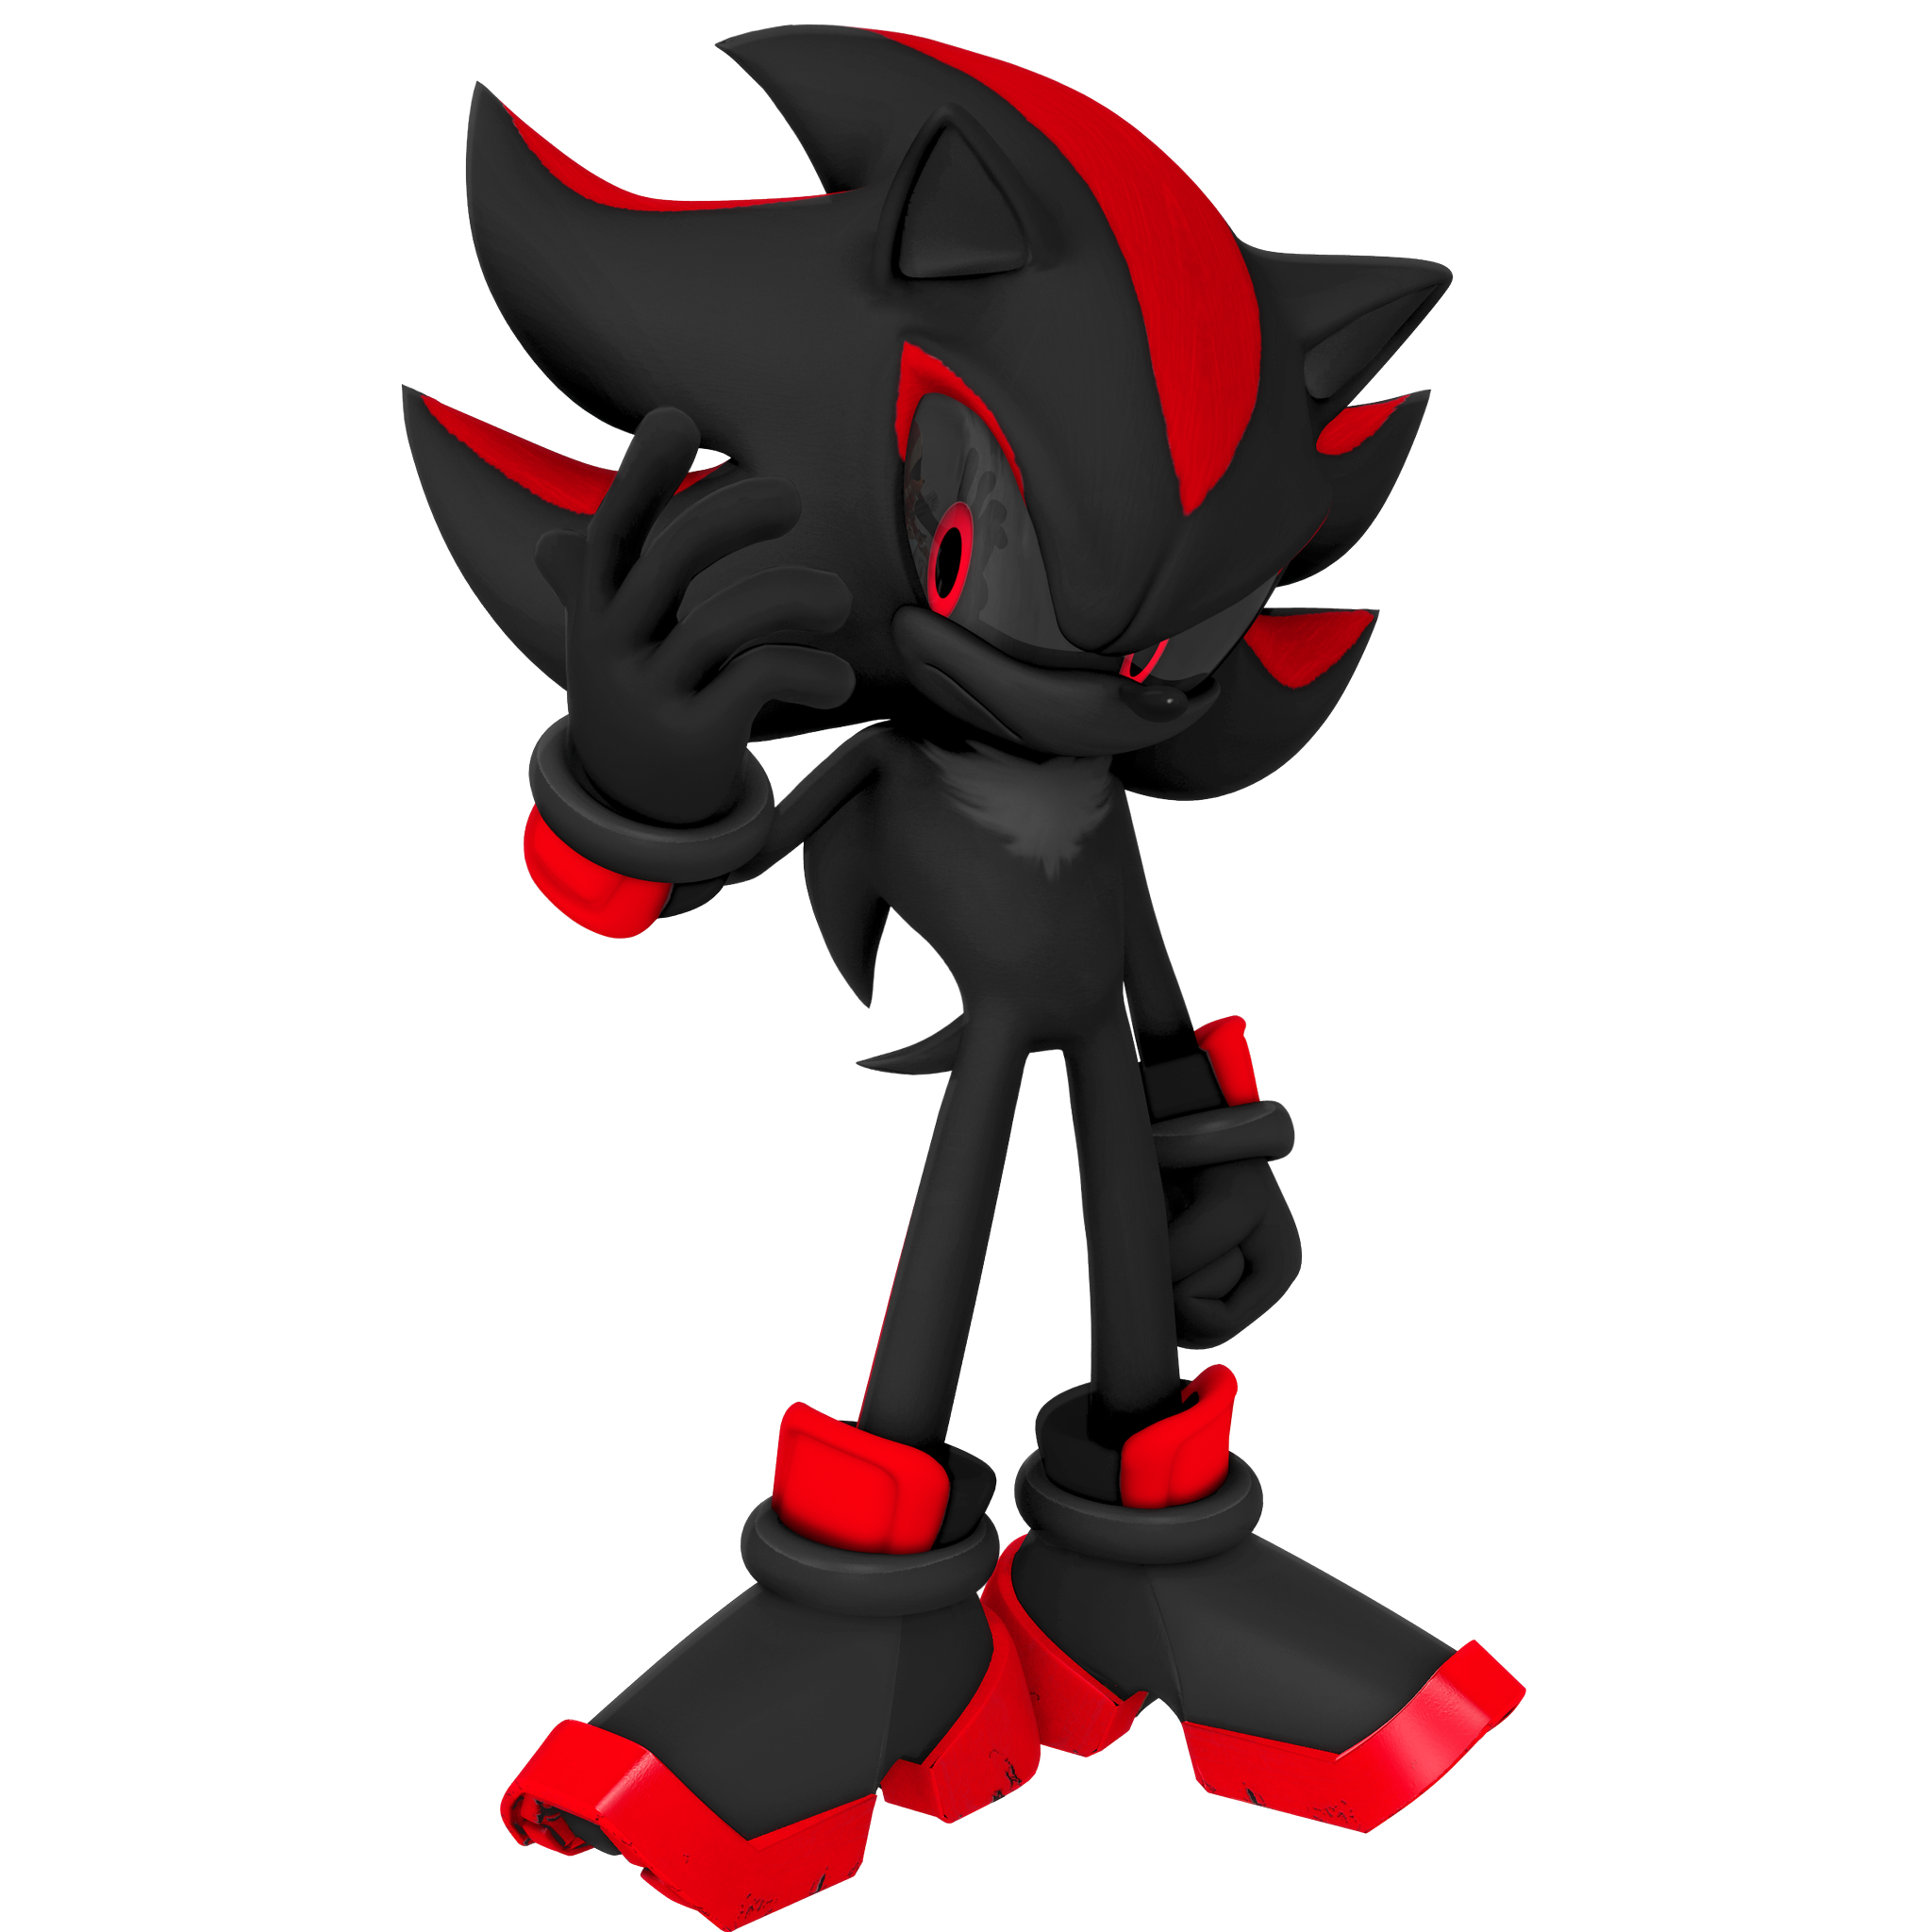 Nibroc.Rock on X: G.U.N Outfit for Shadow render! btw #Happy4th ! hope you  enjoy seeing some amazing fireworks~ HQ:   / X